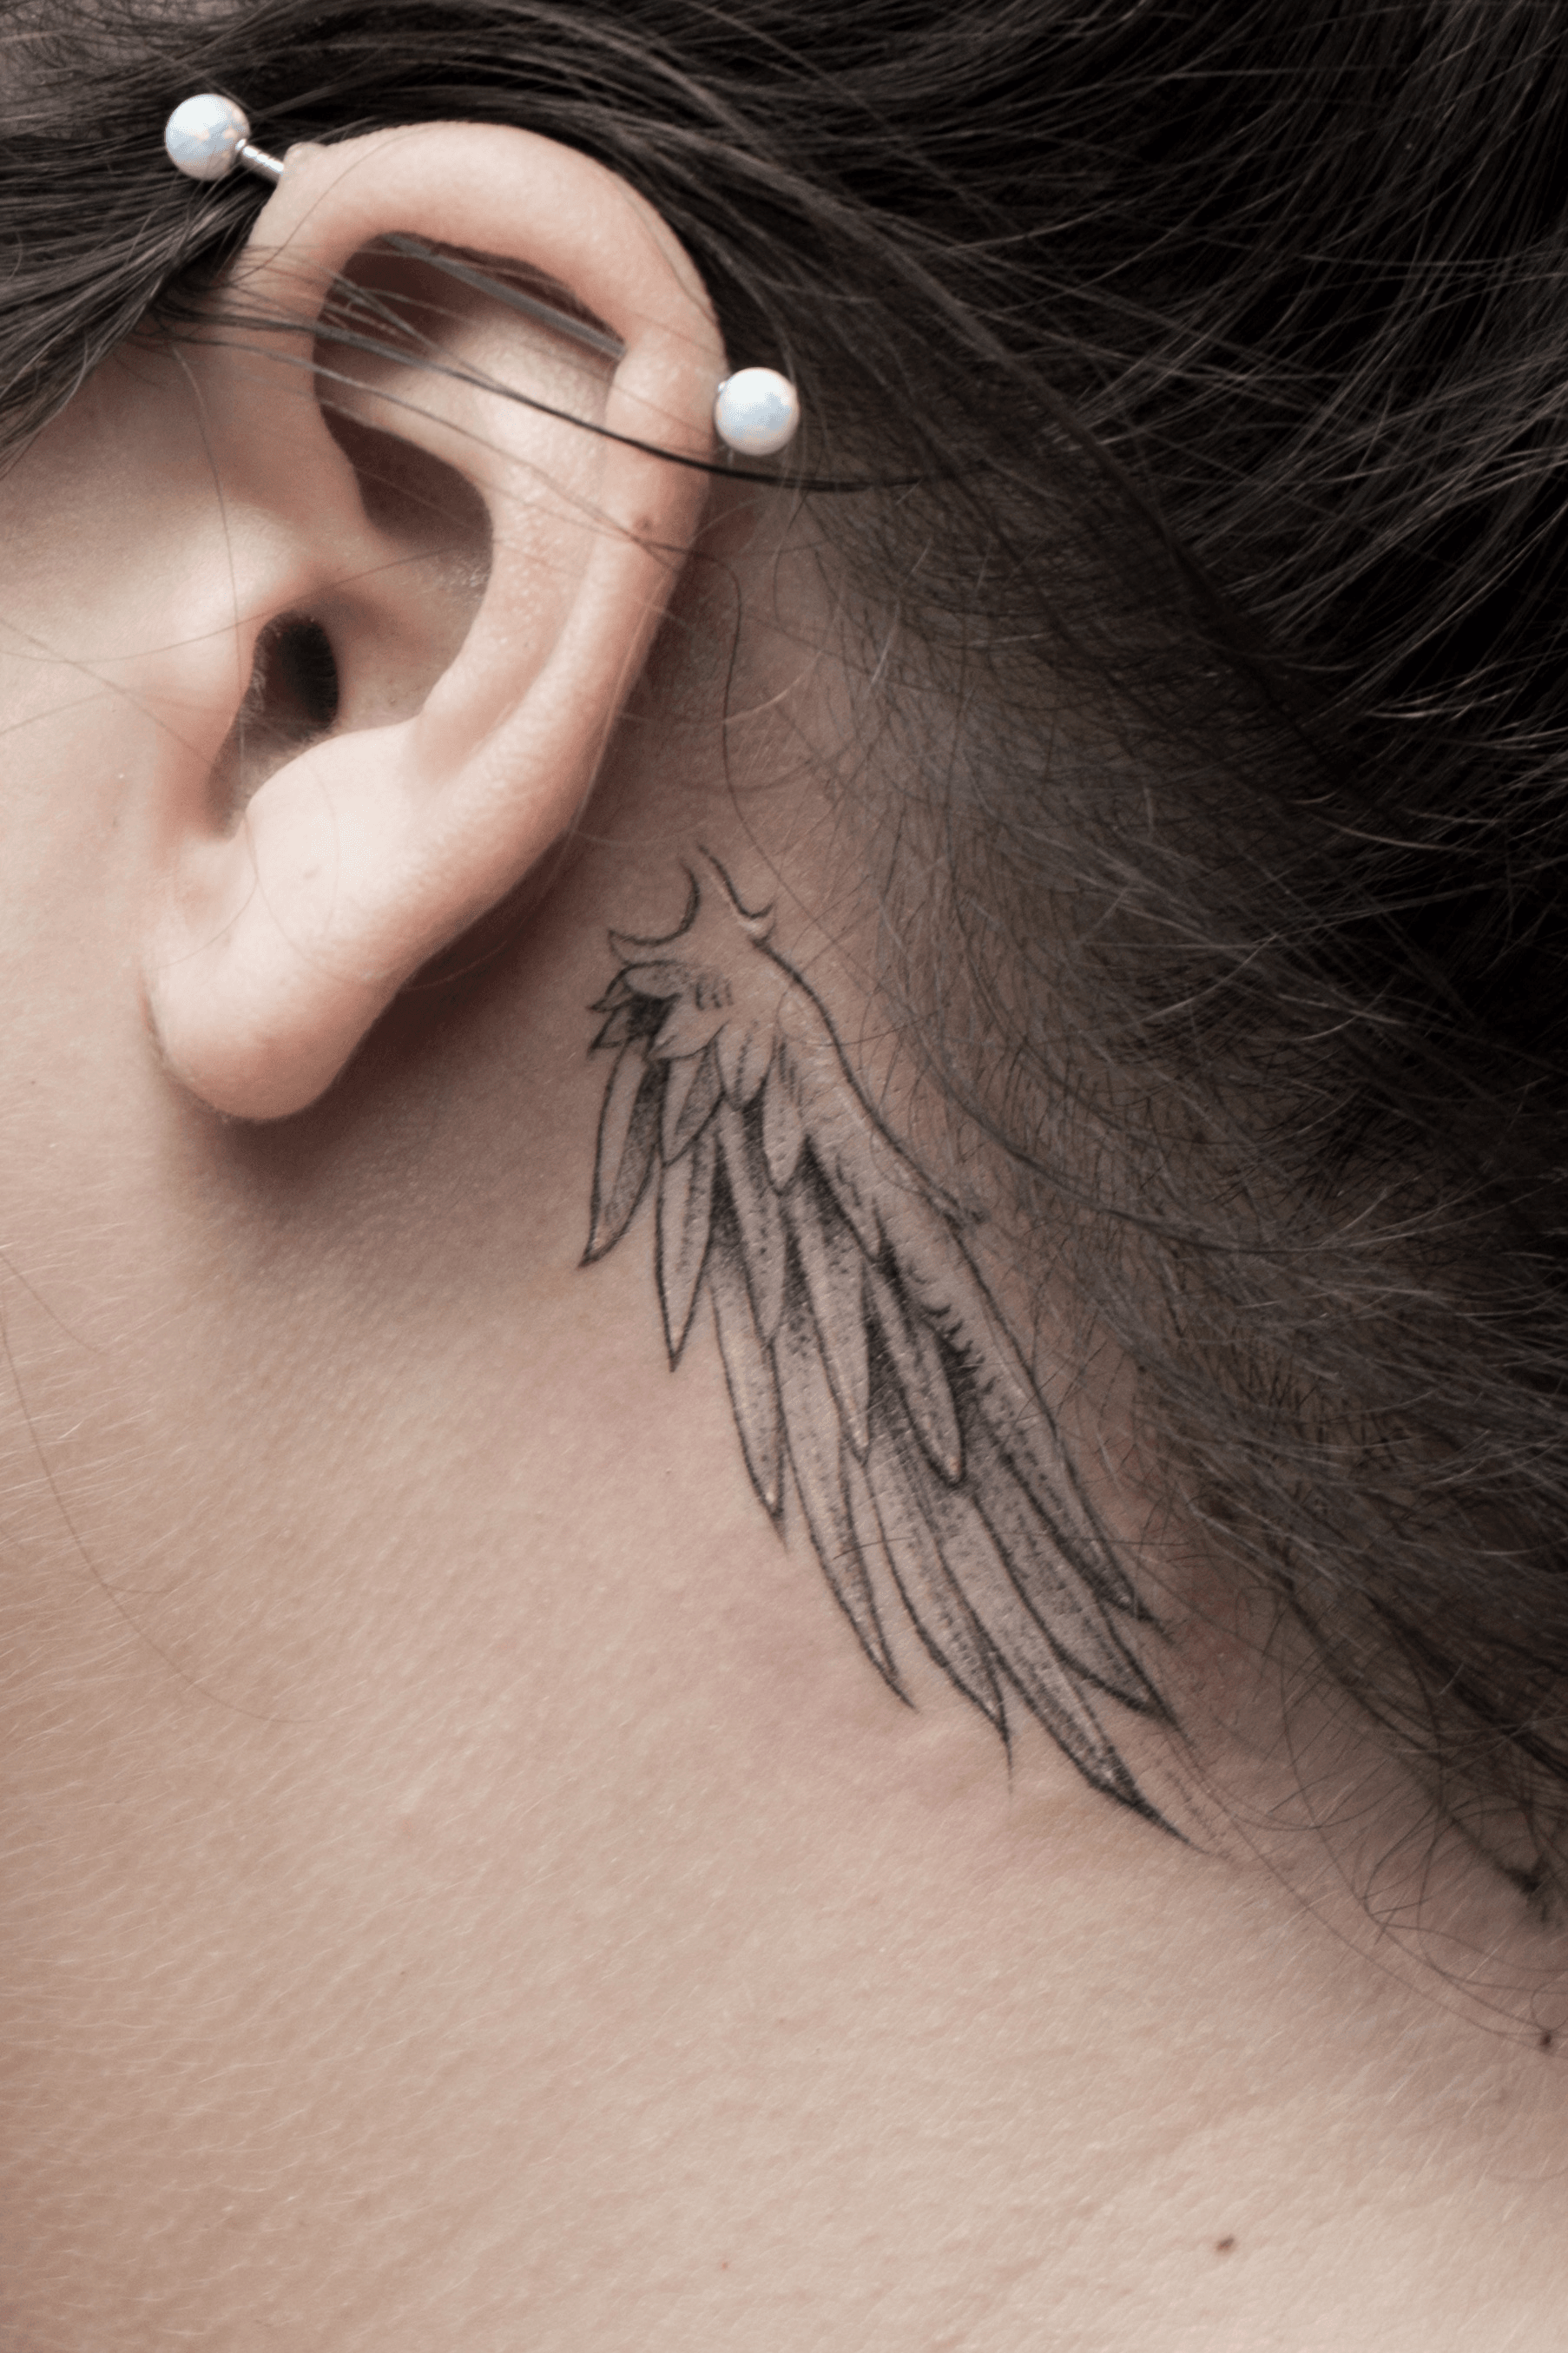 His angel carries me tattoo behind the right ear